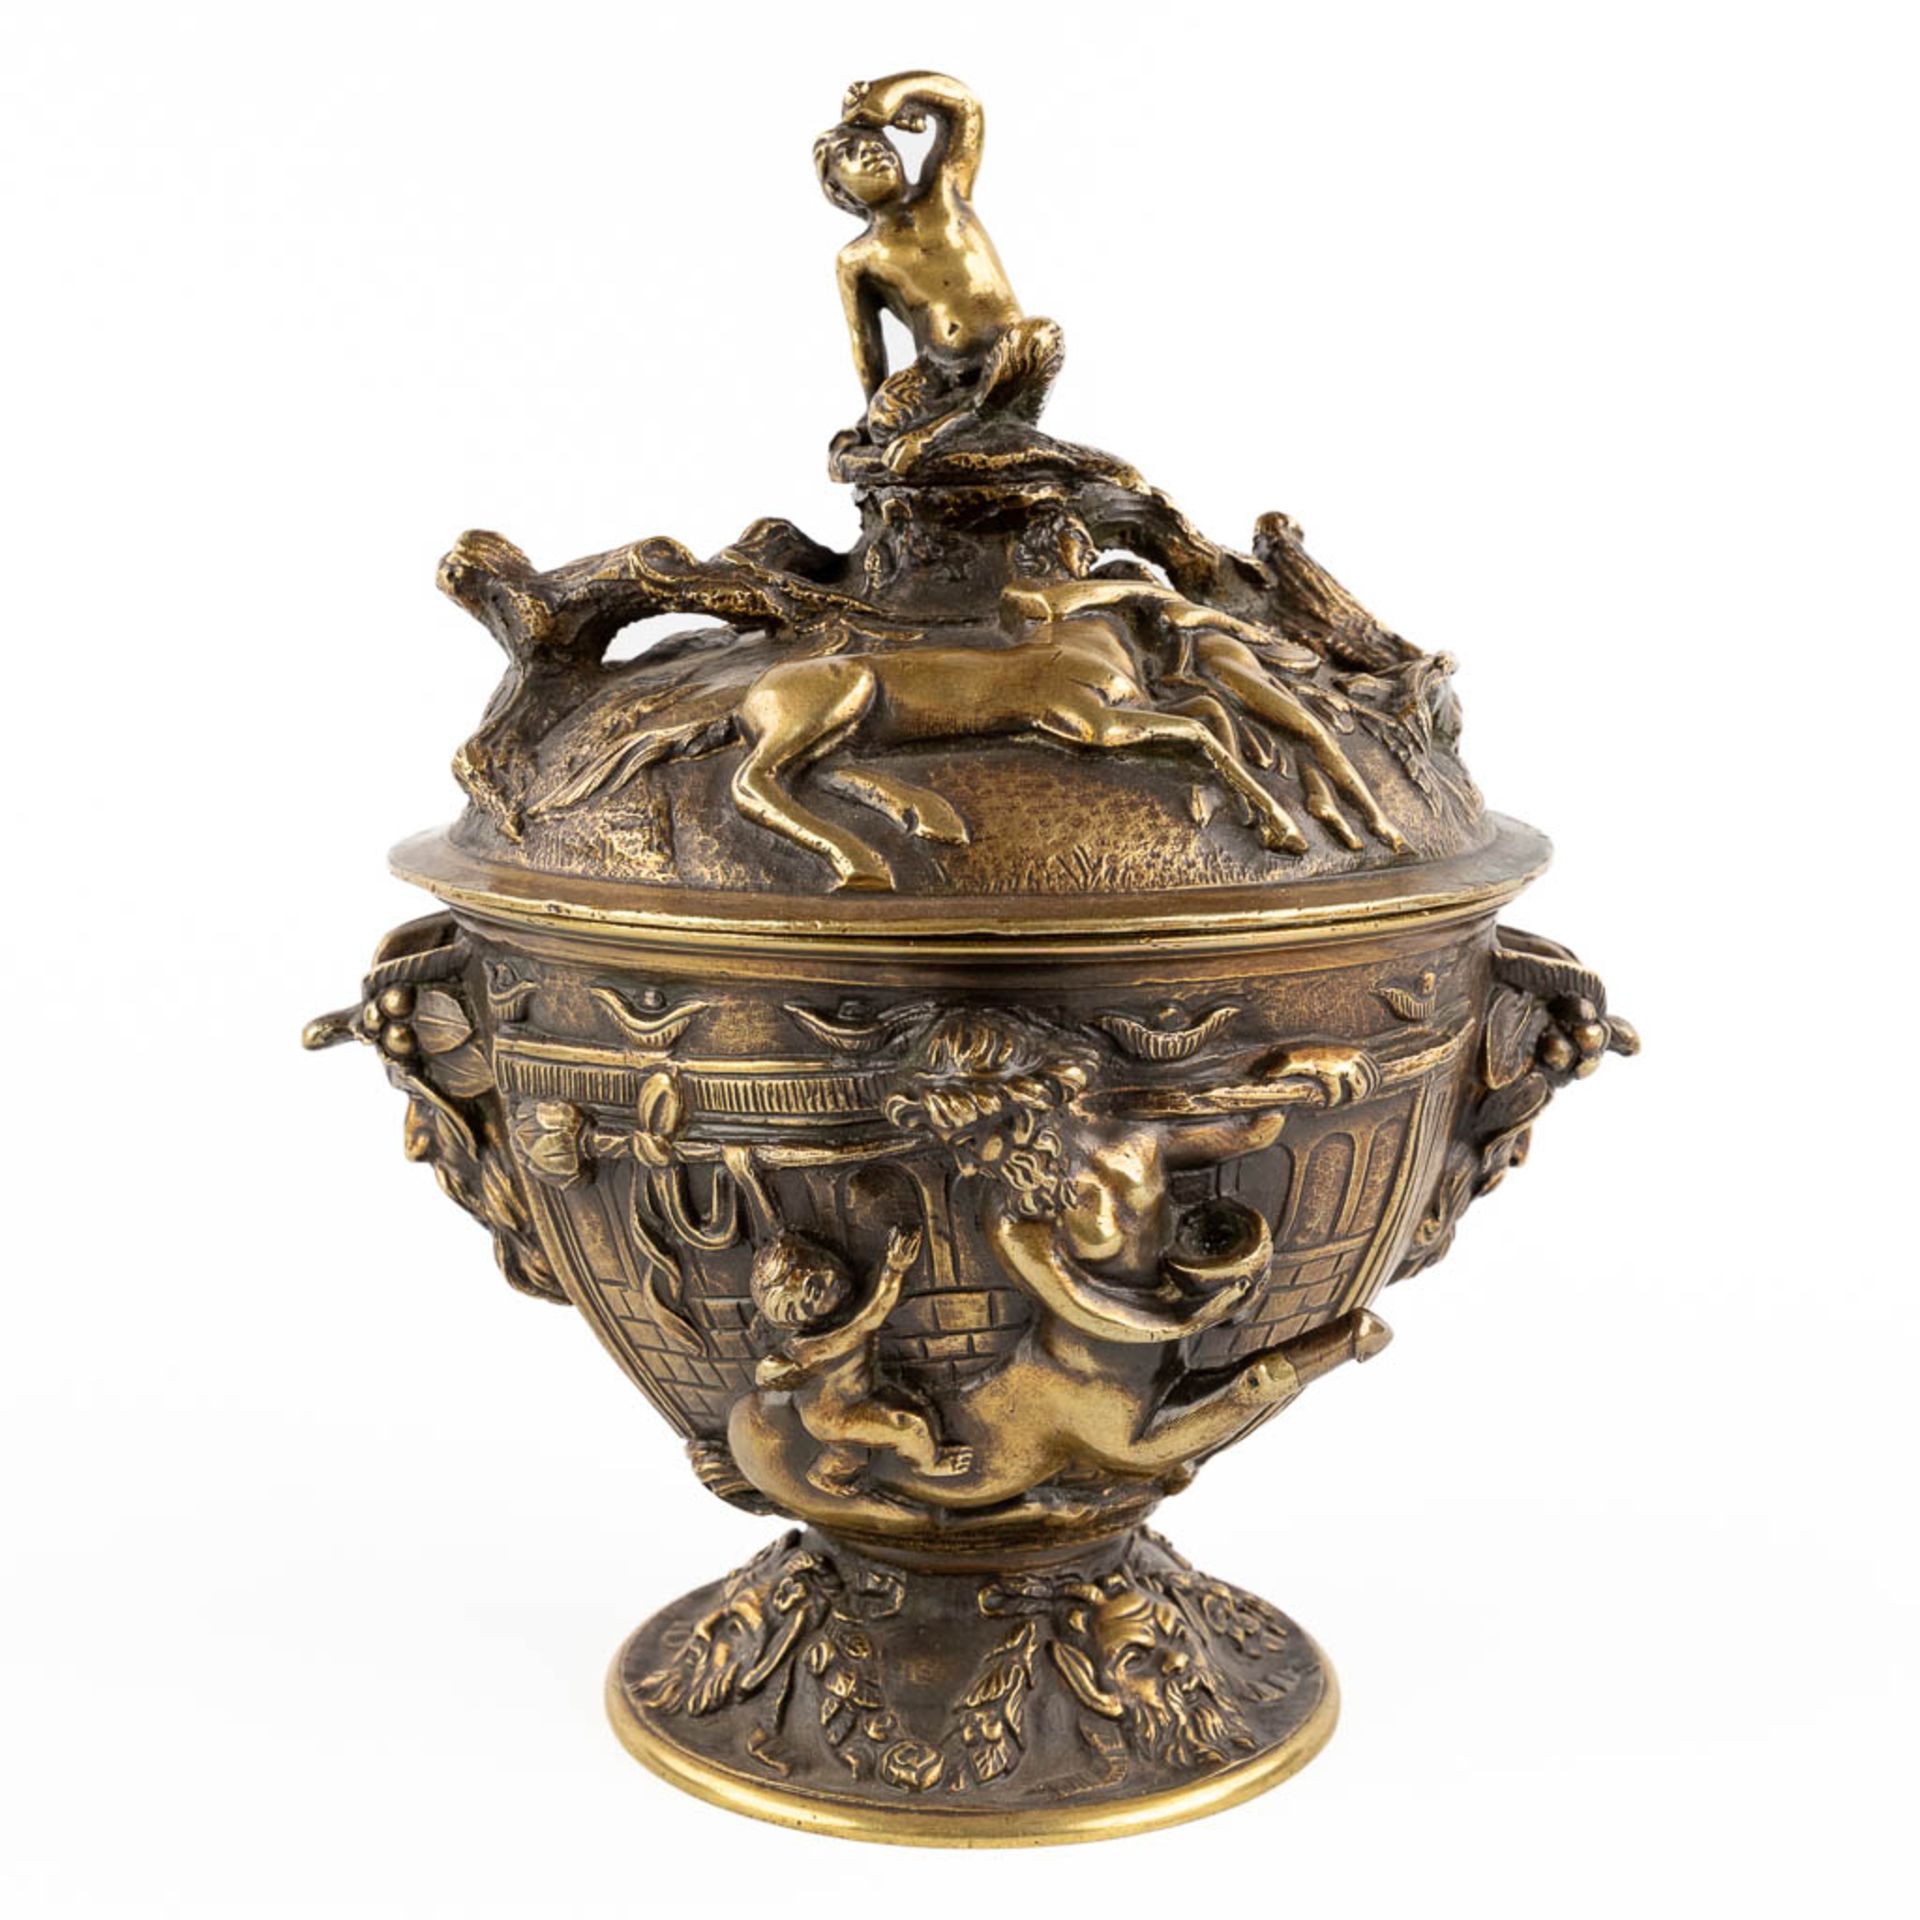 A pot with a lid, decorated with mythological figurines, patinated bronze. (H:23 x D:16 cm)